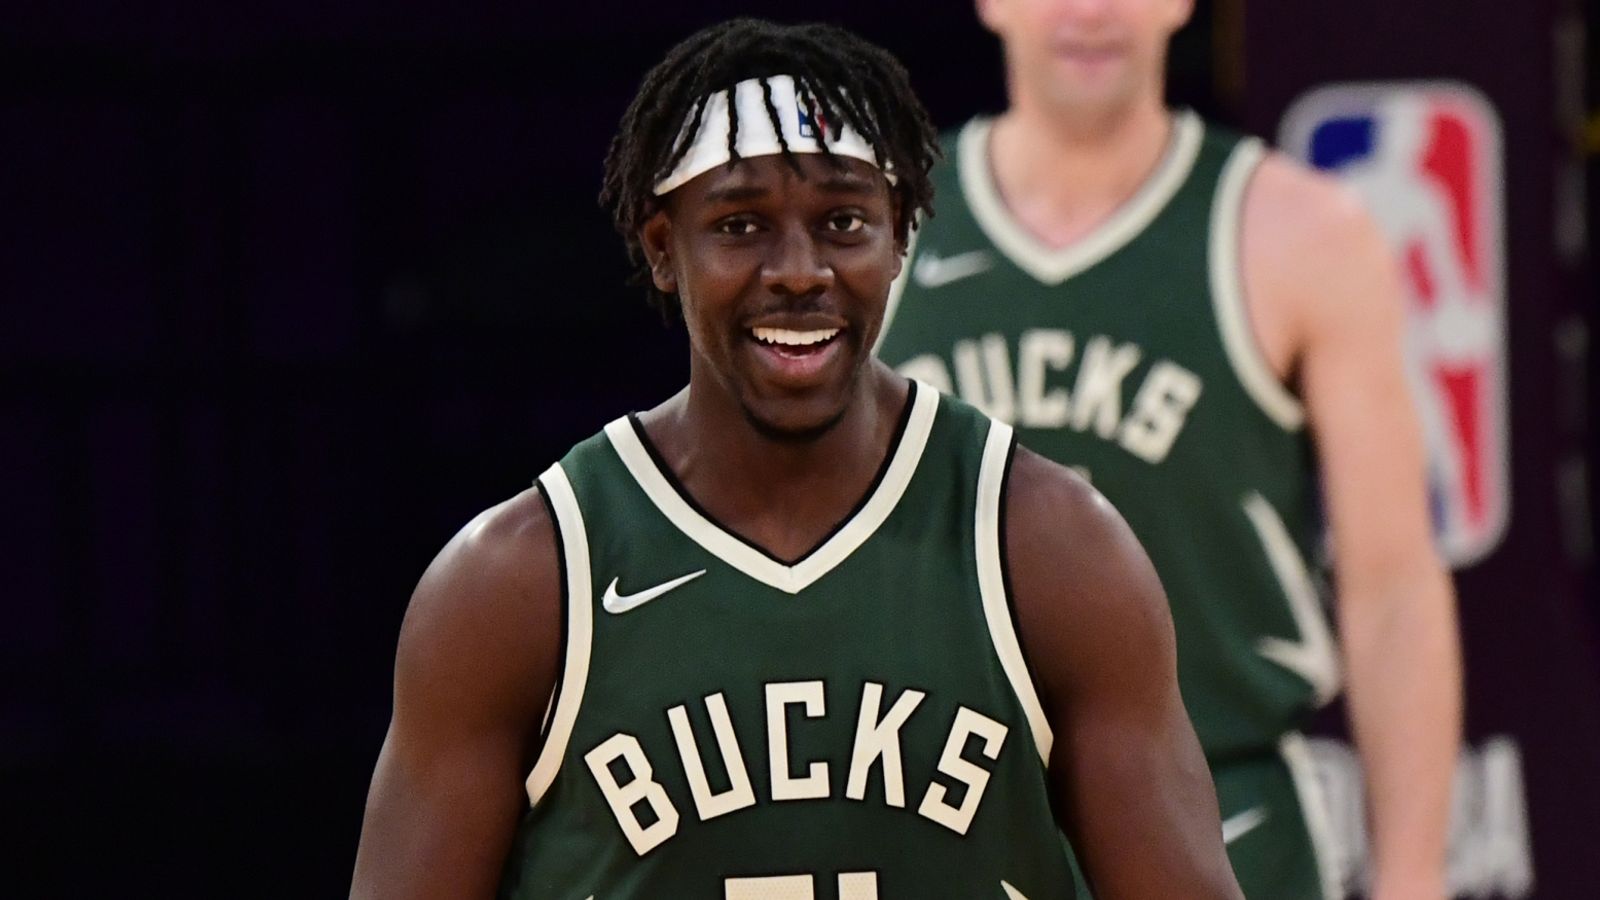 Jrue Holiday leads the Milwaukee Bucks in many ways but is still